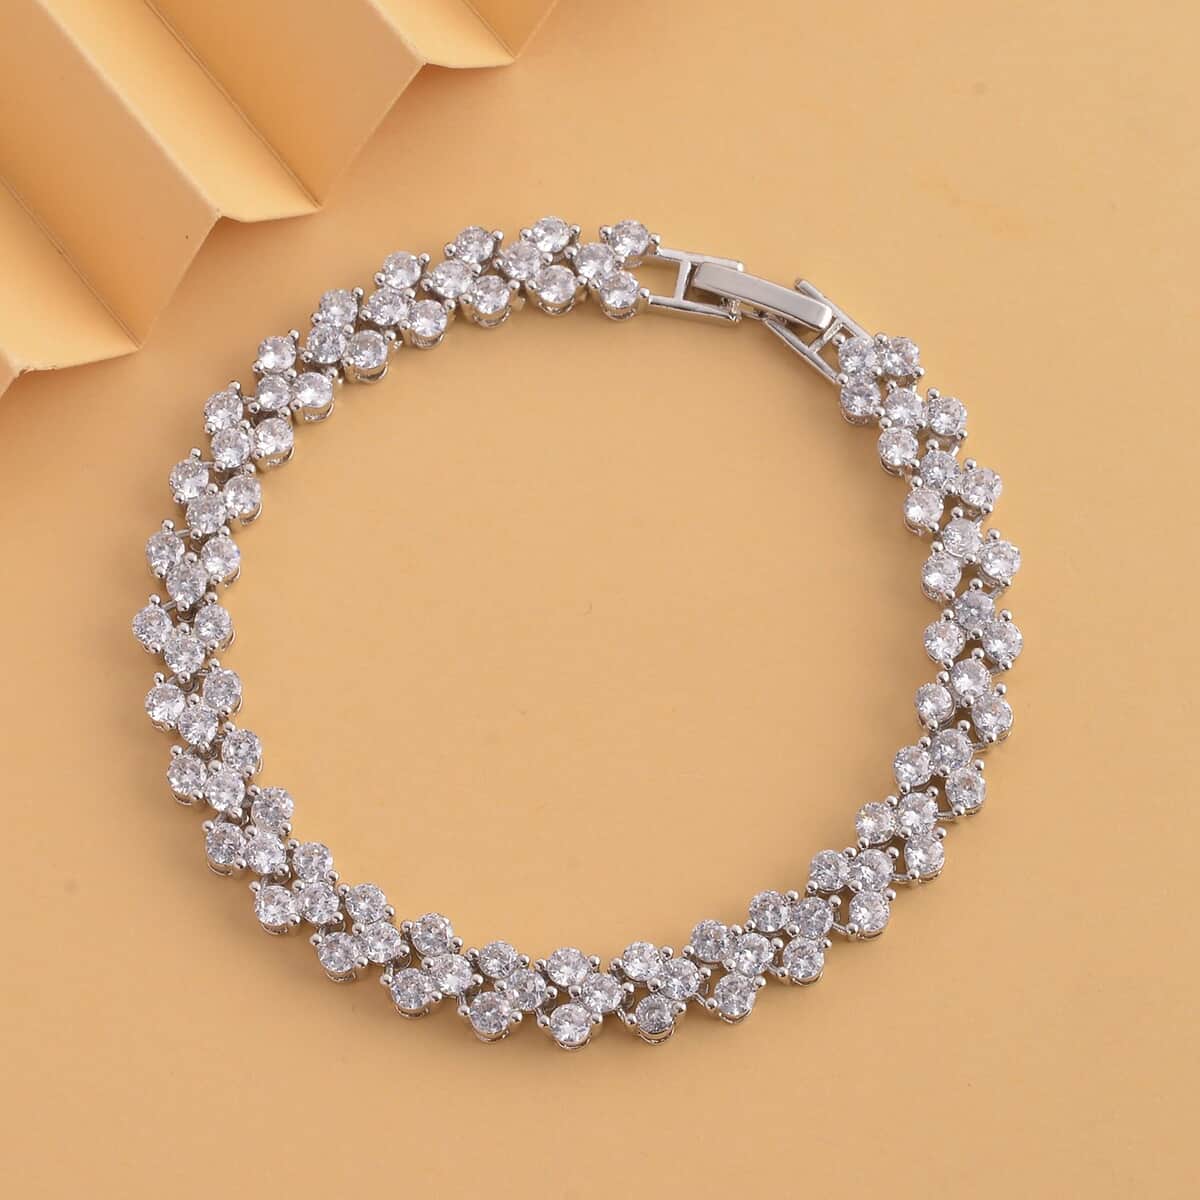 Simulated Diamond Braid Layer Bracelet in Silvertone (6.75 In) image number 1